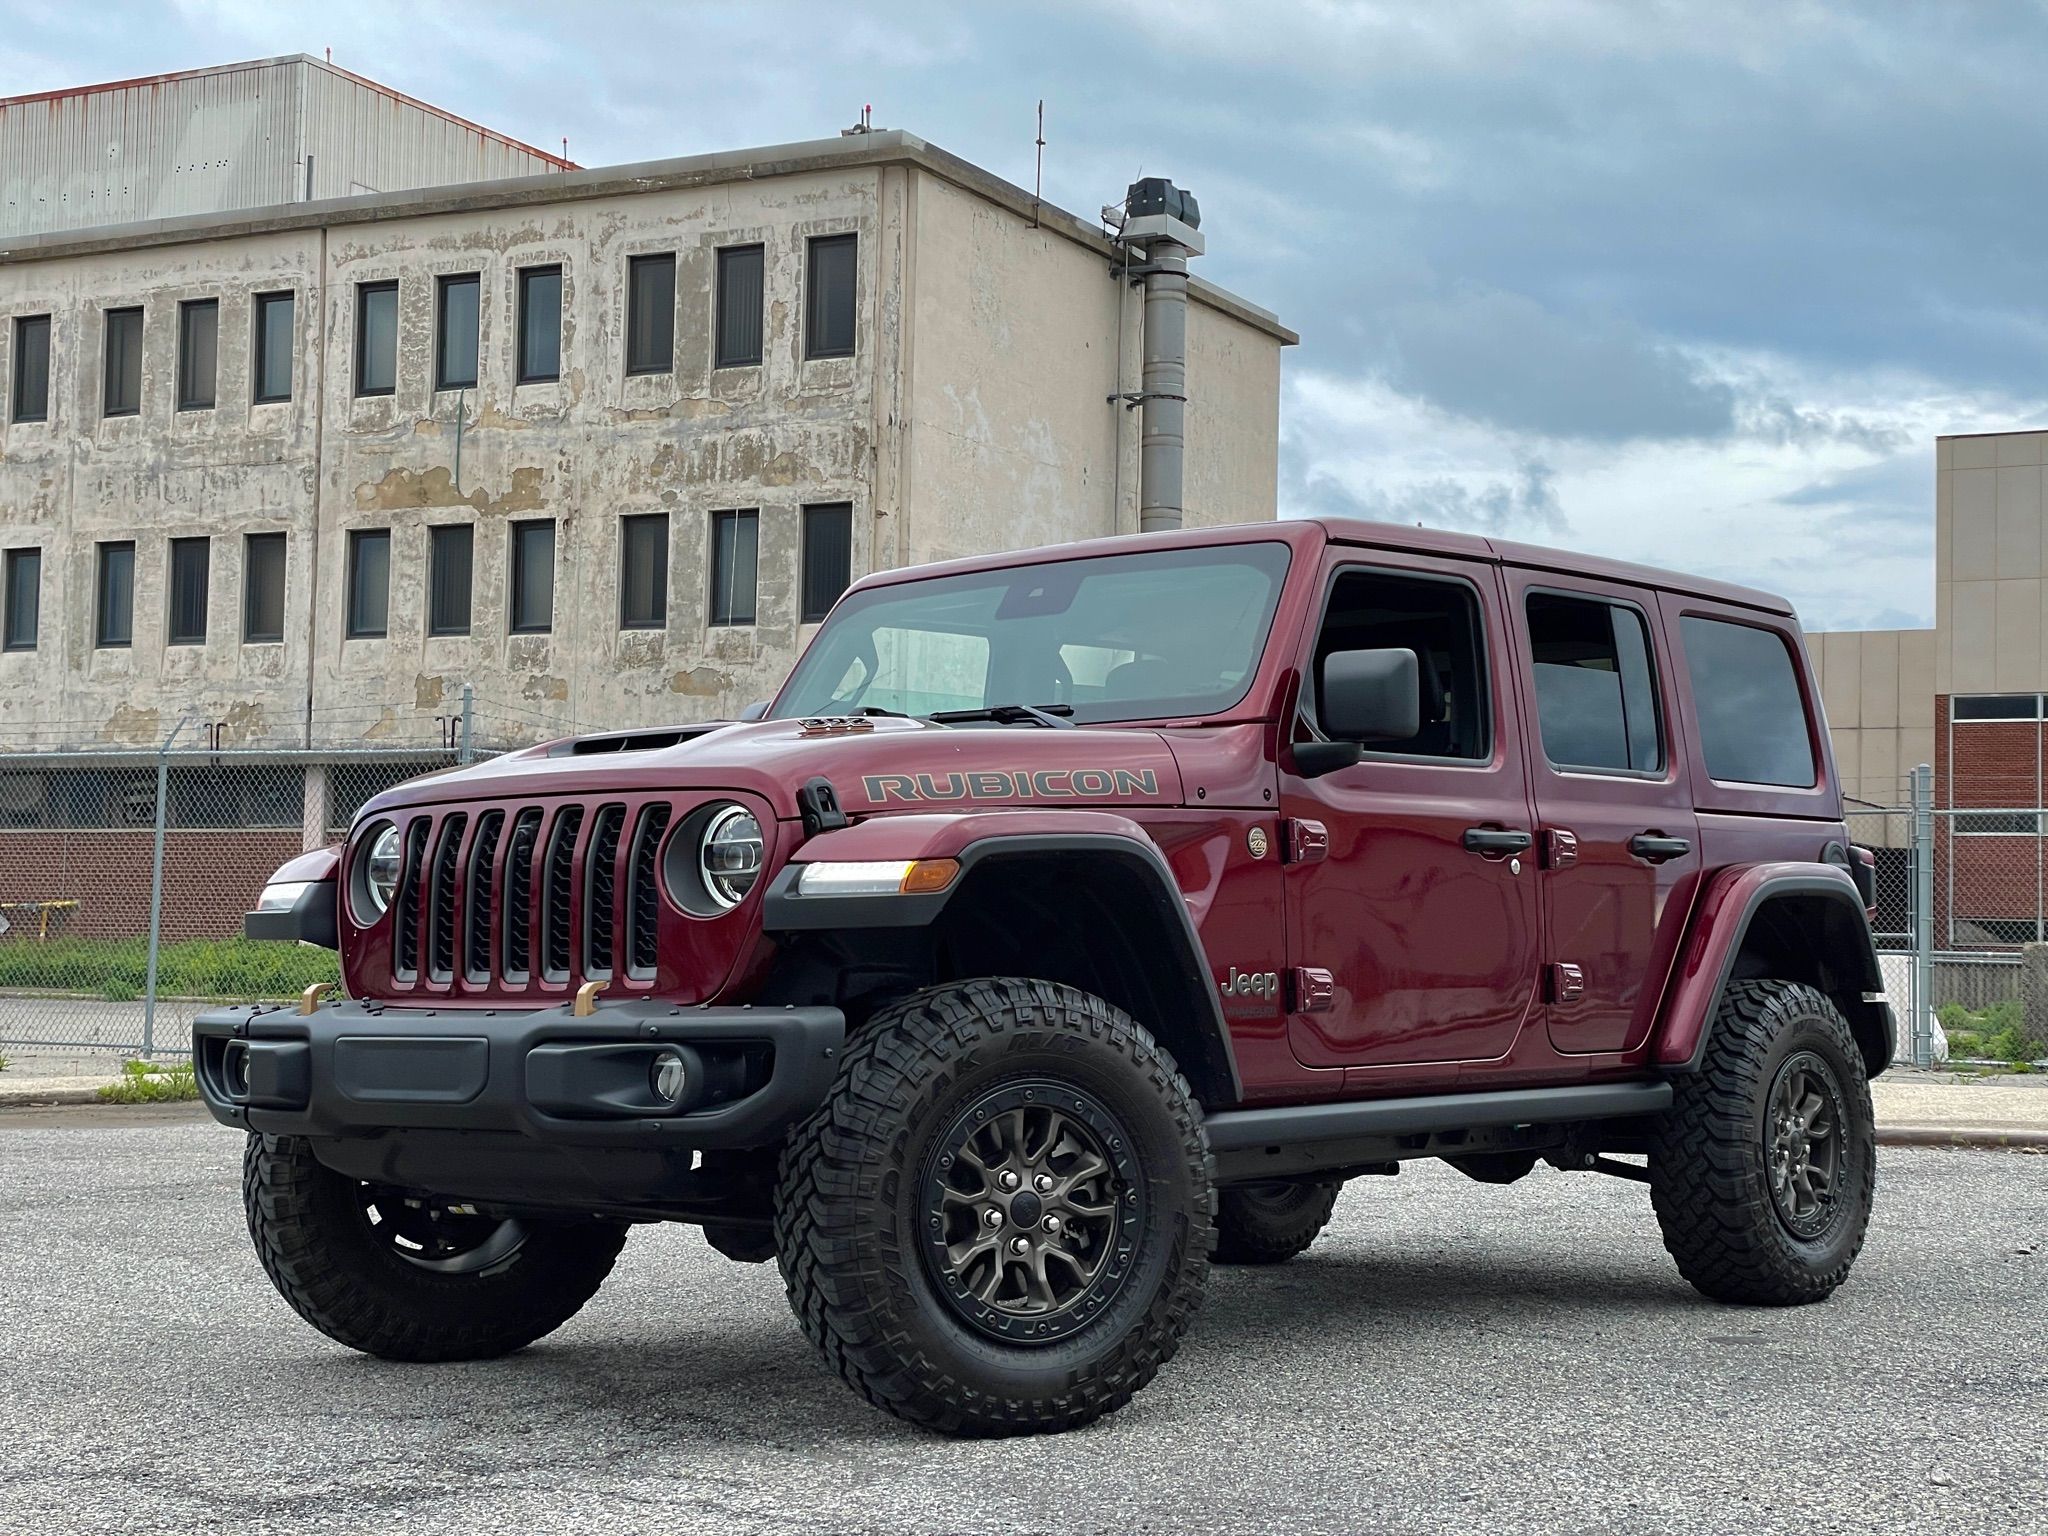 The Jeep Wrangler 392 Is Absurd, But That's Kind of the Point